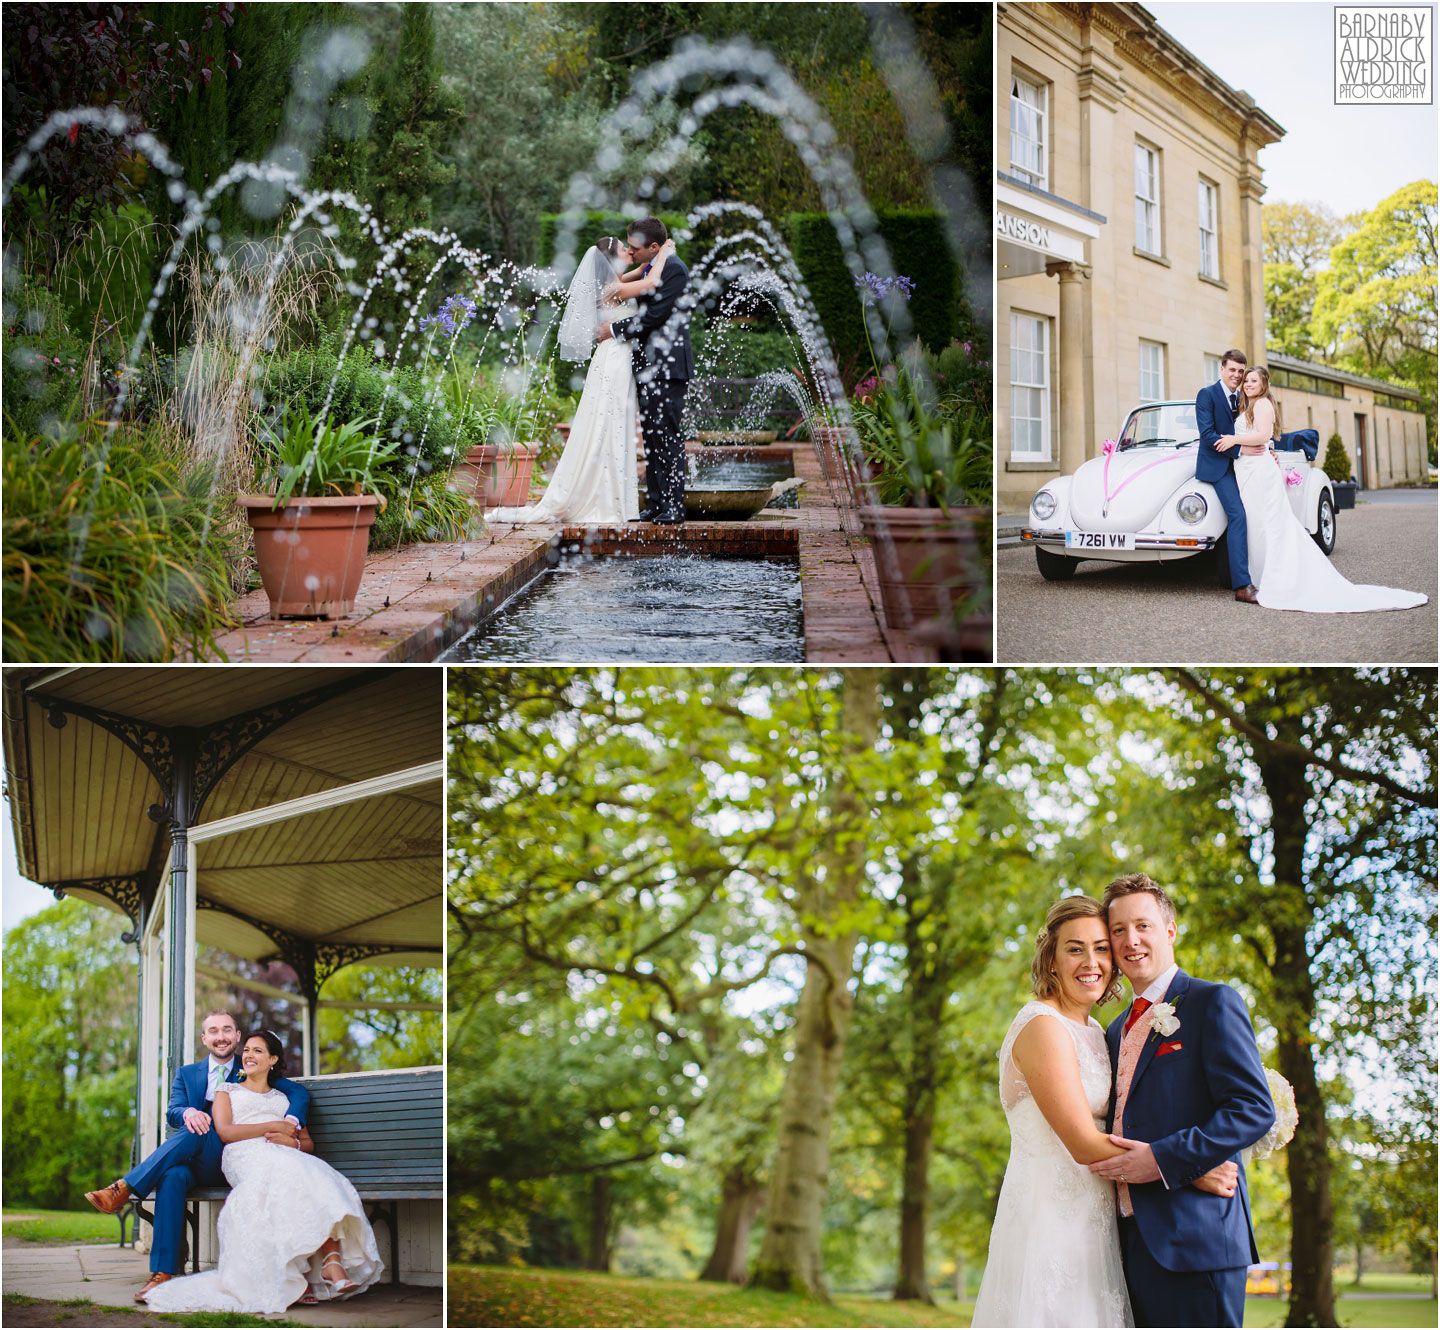 Bride and groom Wedding Photography at The Mansion in Roundhay Park in Leeds